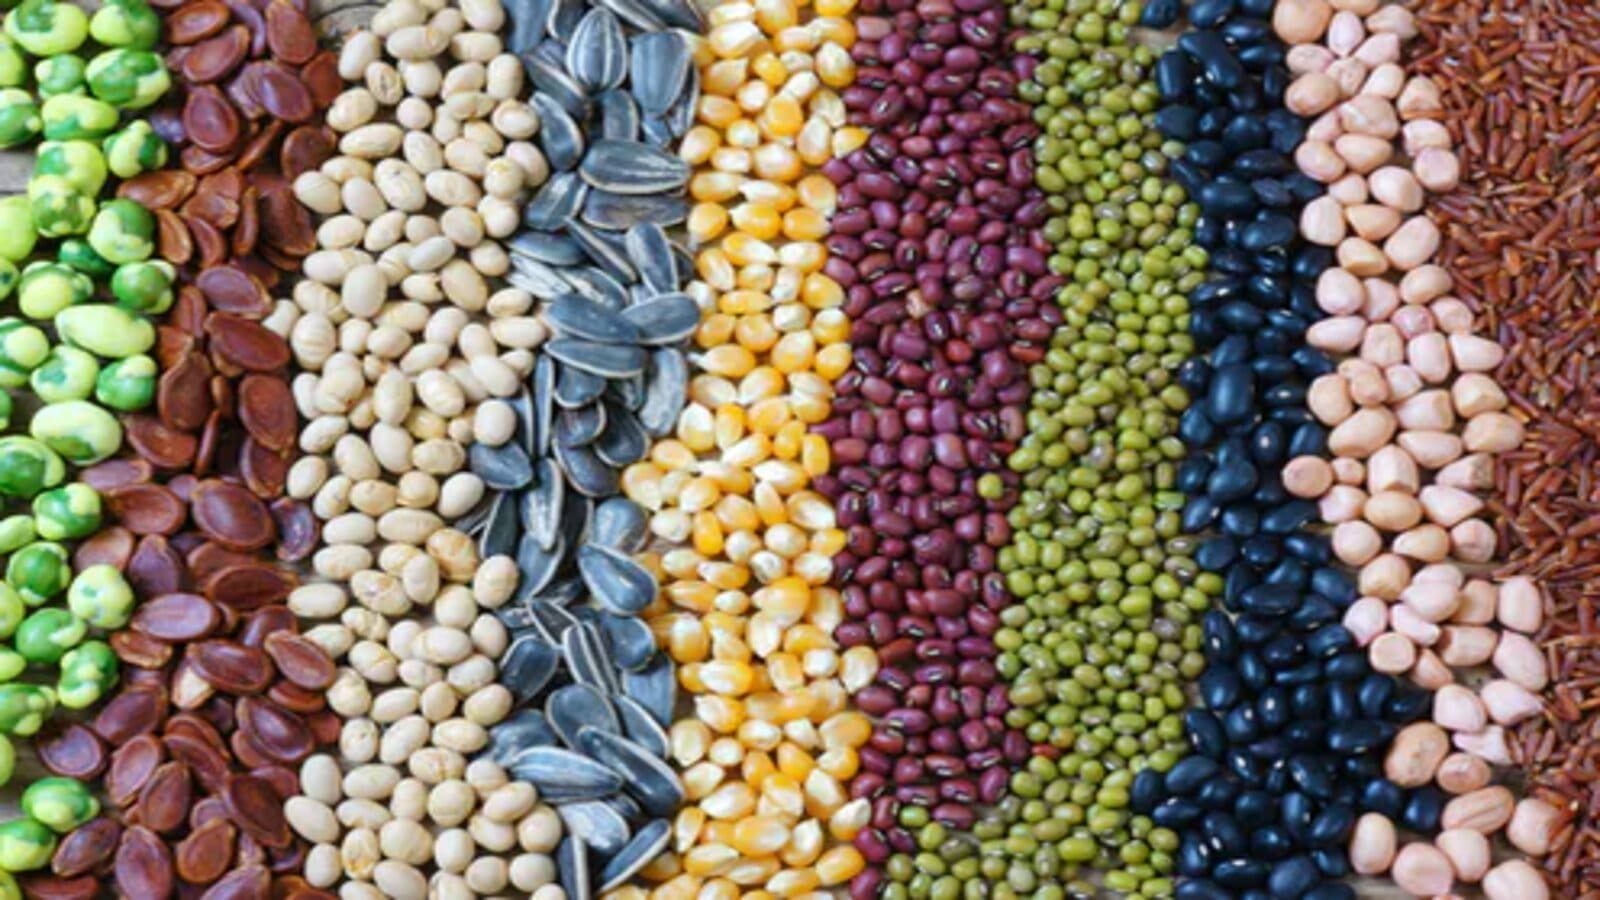 Uganda seeks to establish a national seed company aimed at reducing cost, counterfeit seeds